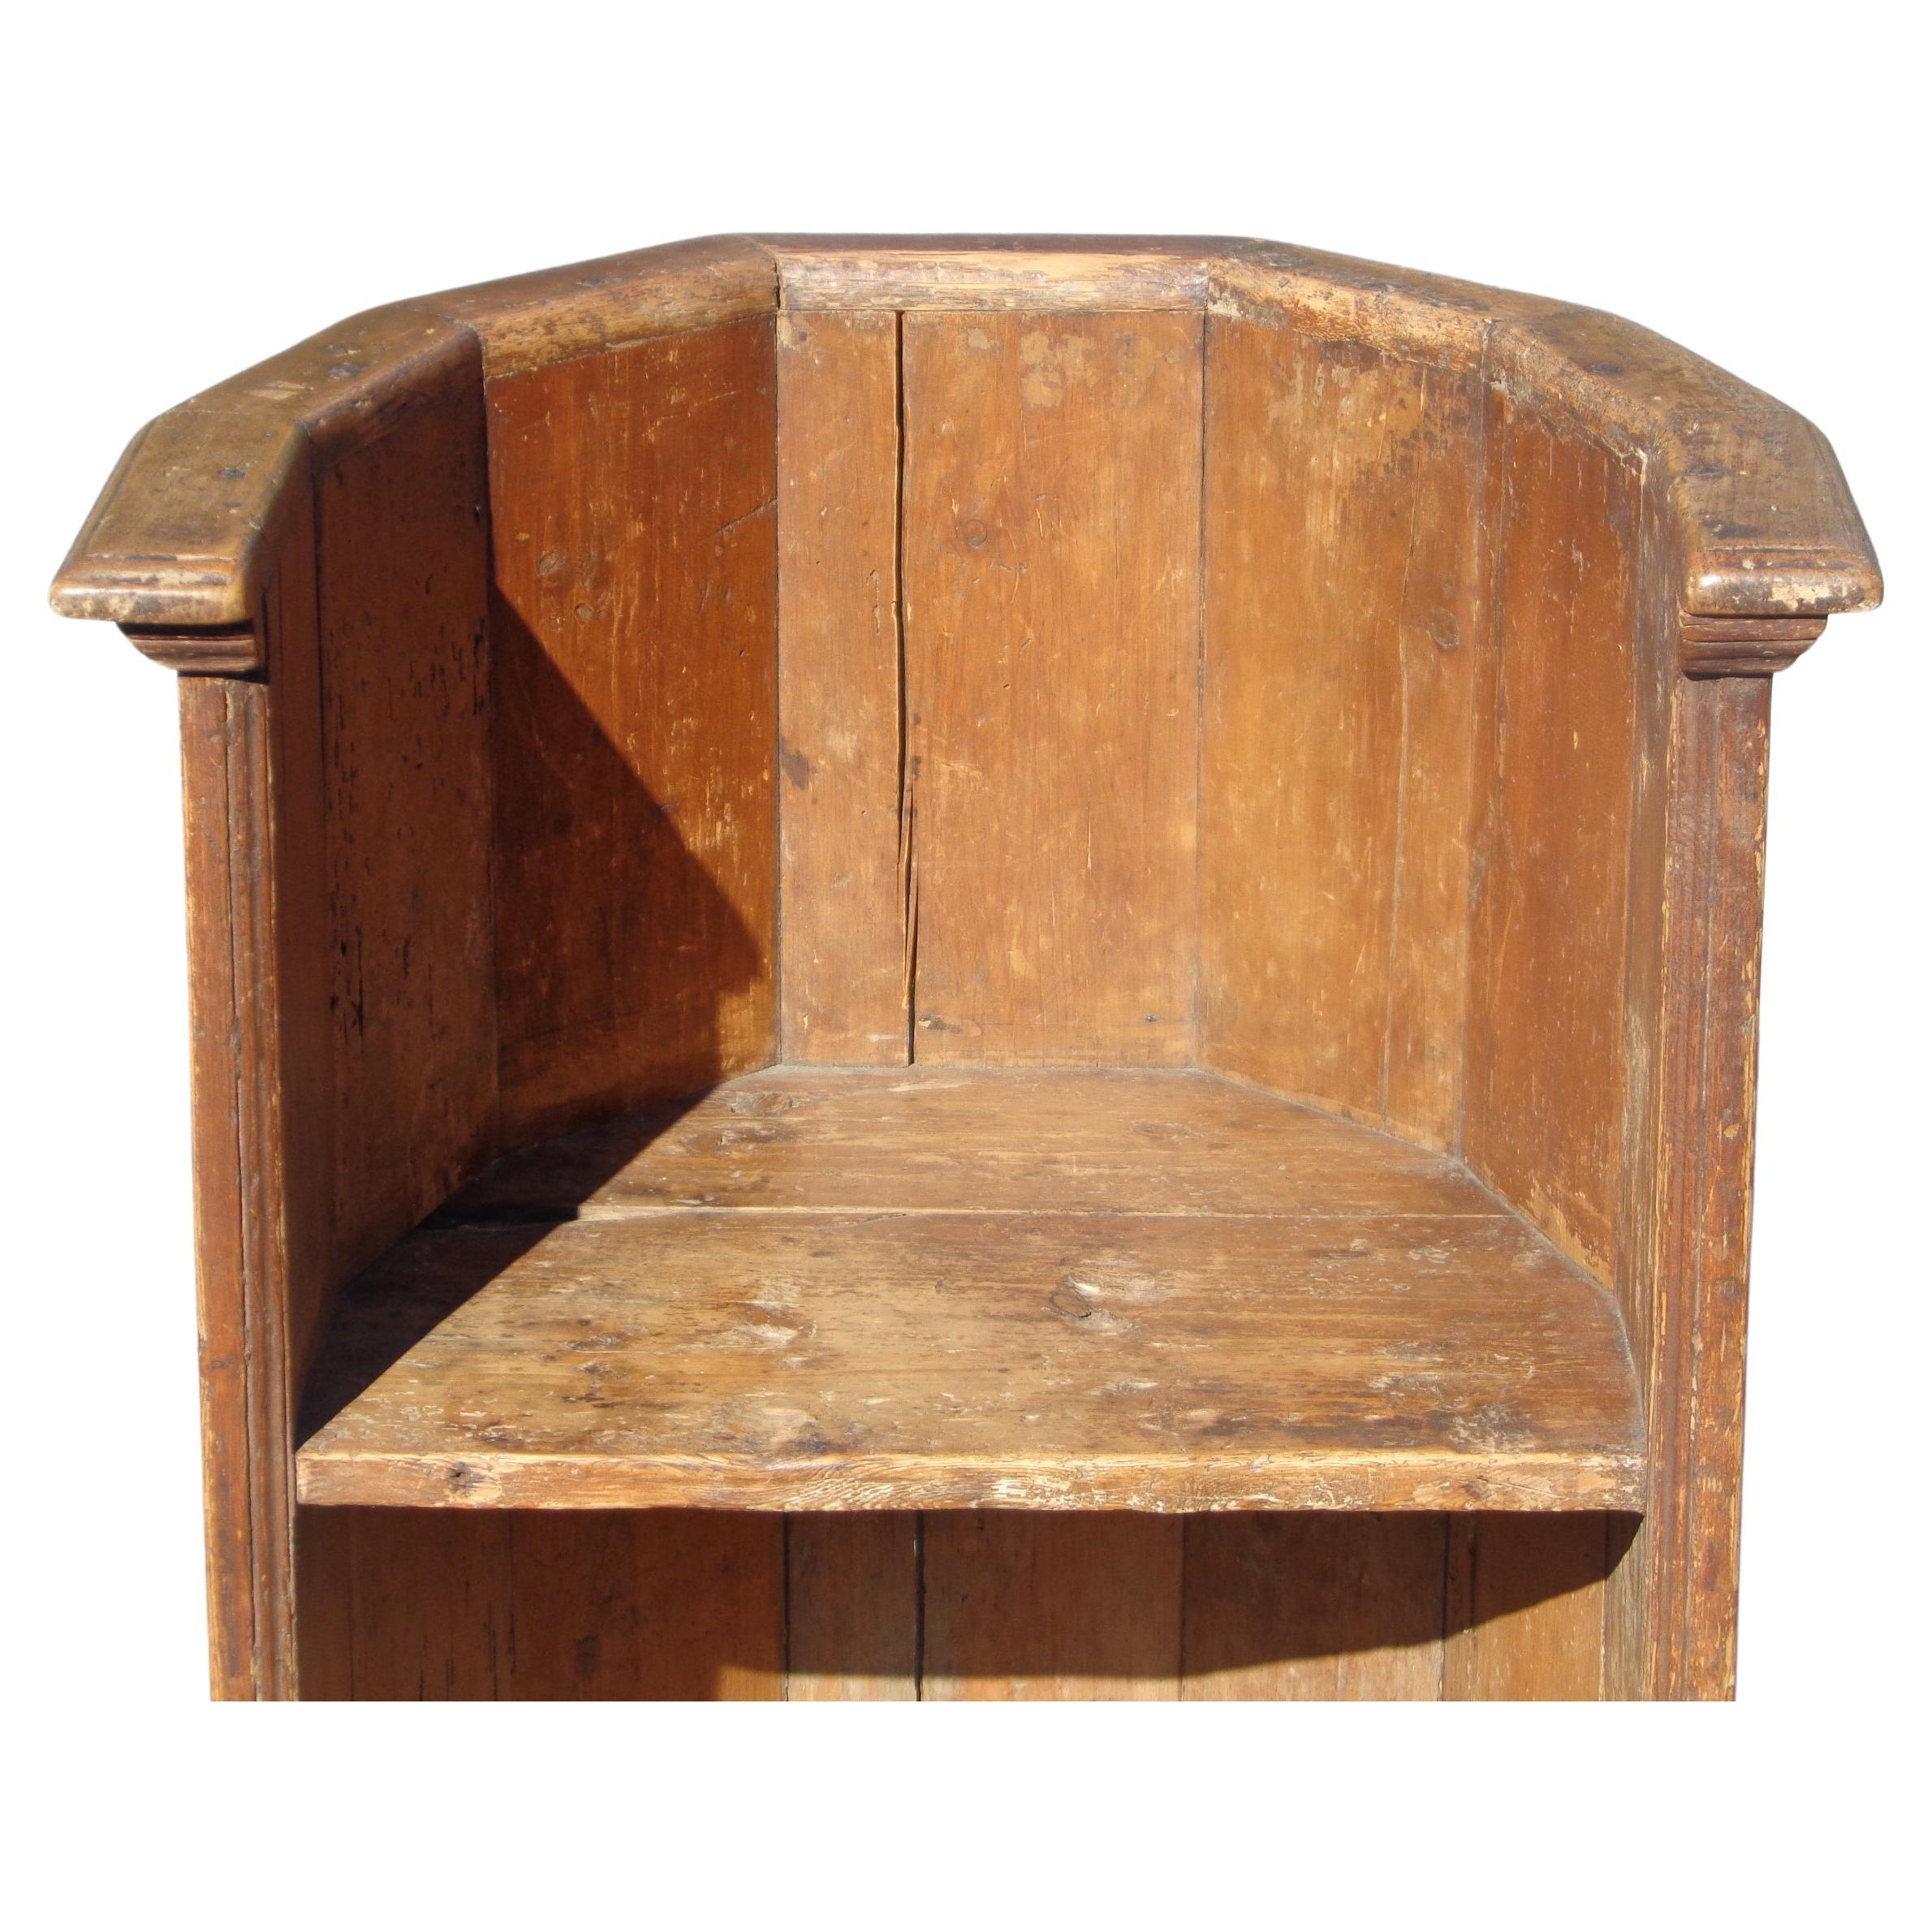 Antique 18th Century Rustic Choir Stall Barrel Chair In Fair Condition For Sale In Rochester, NY